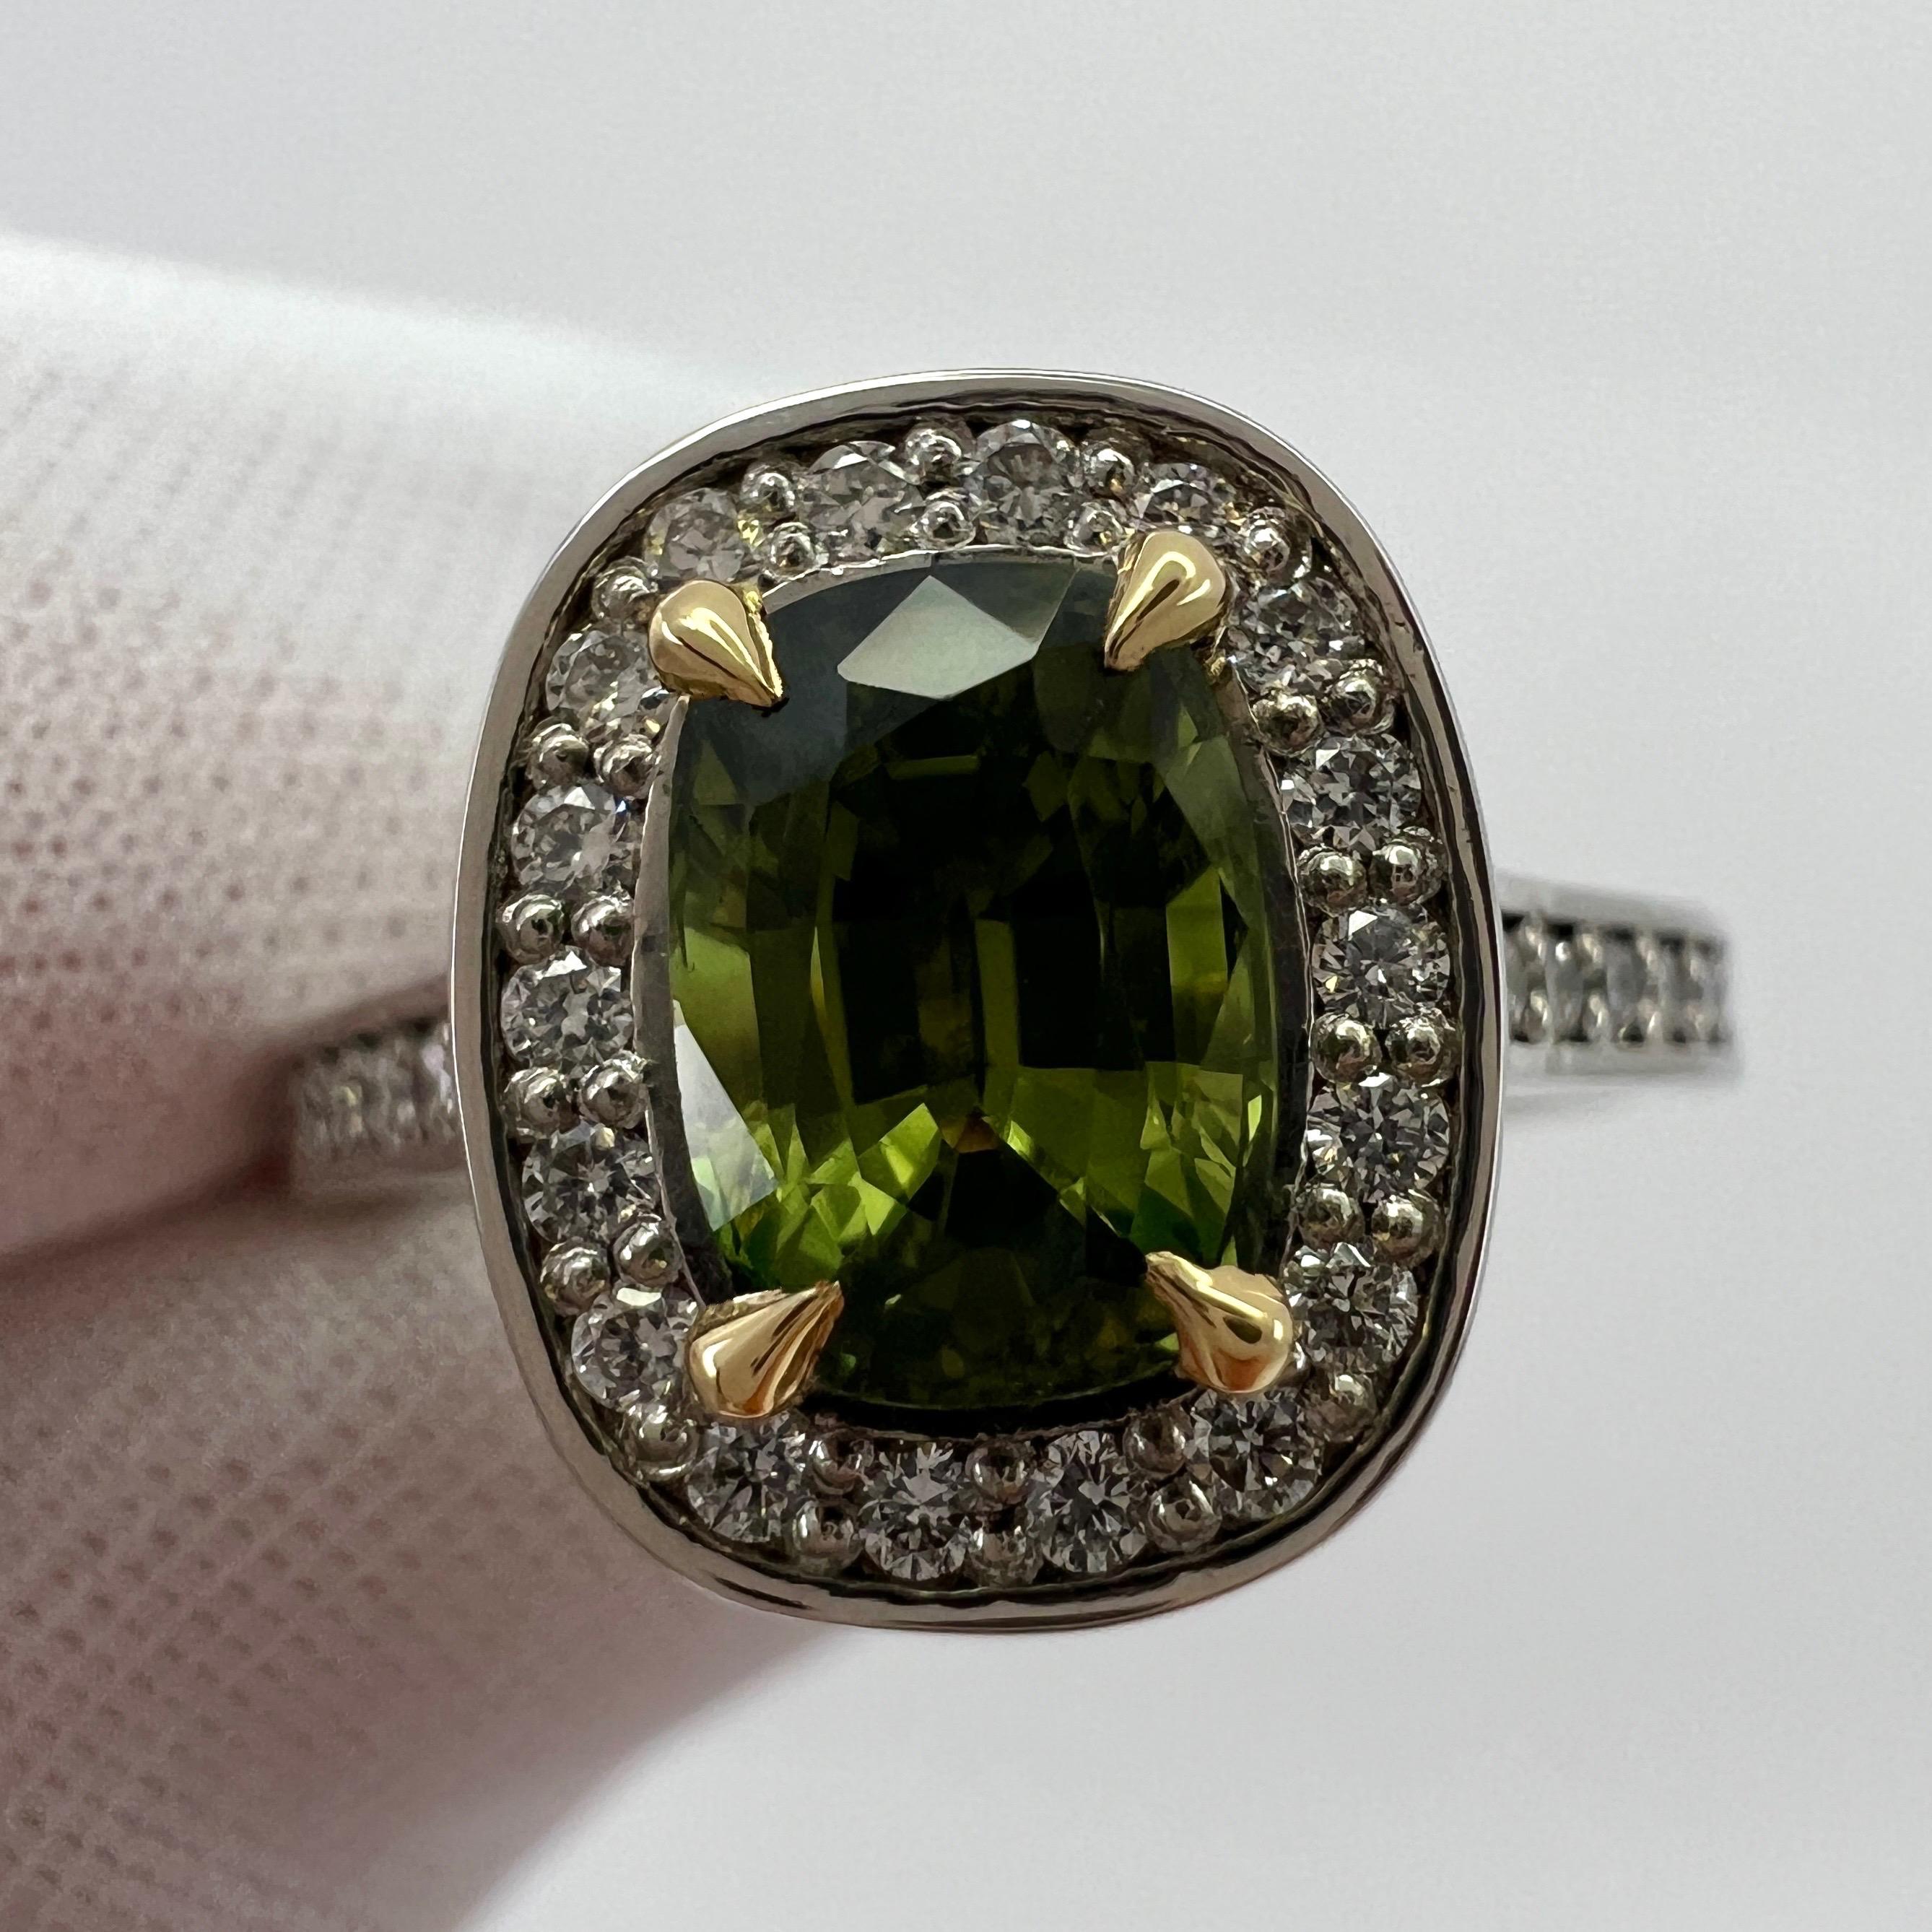 GIA Certified Vivid Green Thai Sapphire And Diamond 18k Yellow And White Gold Halo Ring.

1.50 Carat Thai sapphire with a stunning vivid green yellow colour. Fully certified by GIA confirming stone as natural, untreated/unheated and rare Thai